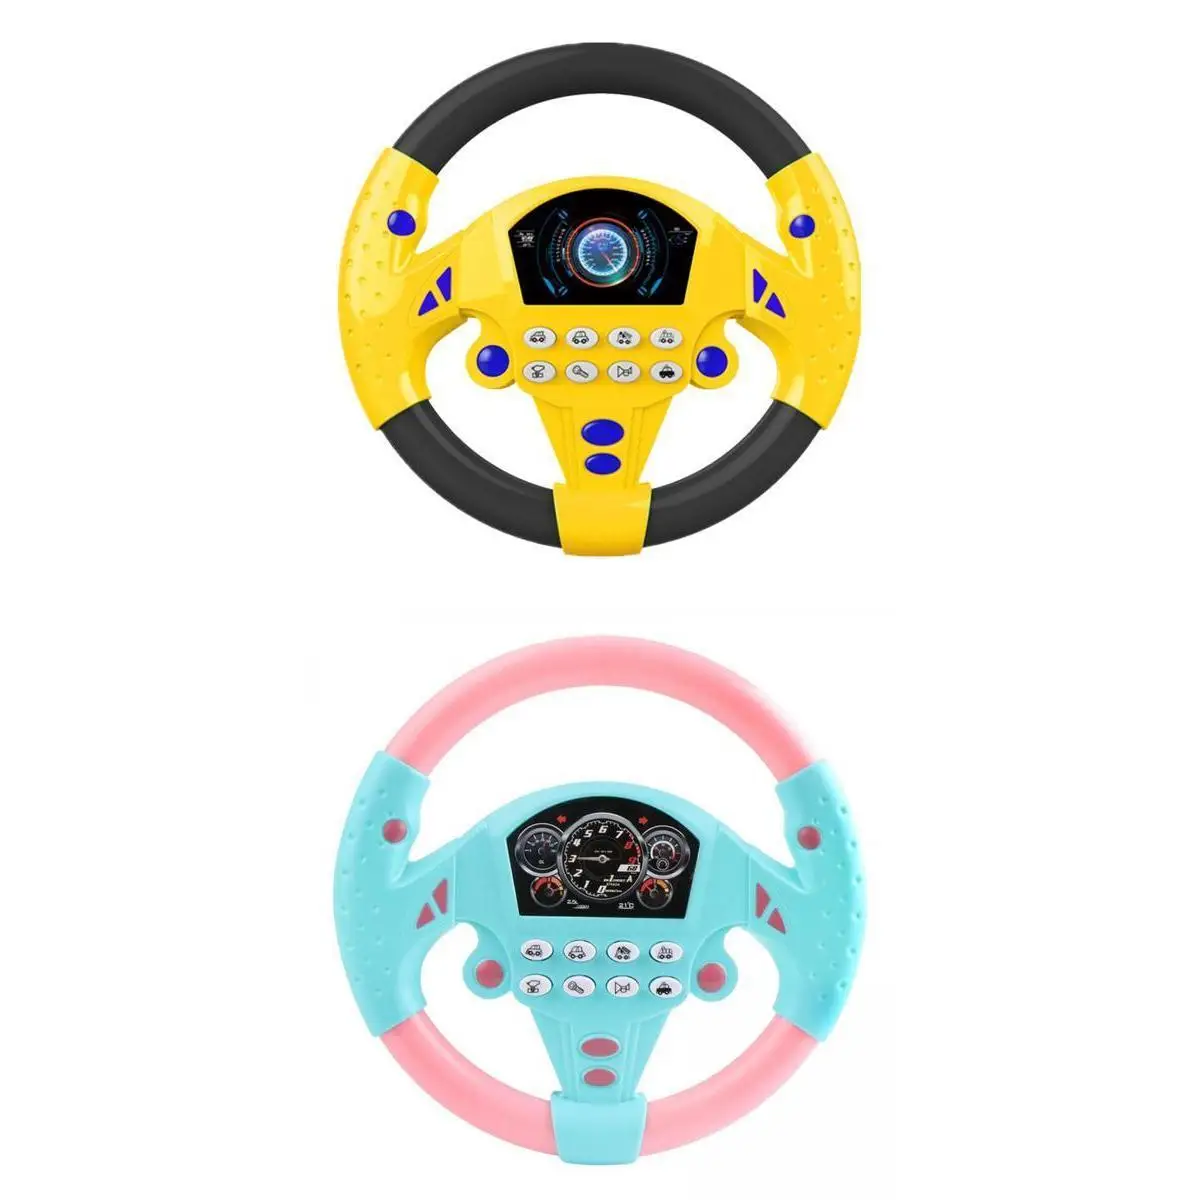 2x Steering Wheel Toy Driving Controller Car Driving Toy Electric Early Education Sounding Toy Gift Driving Wheel for Kids